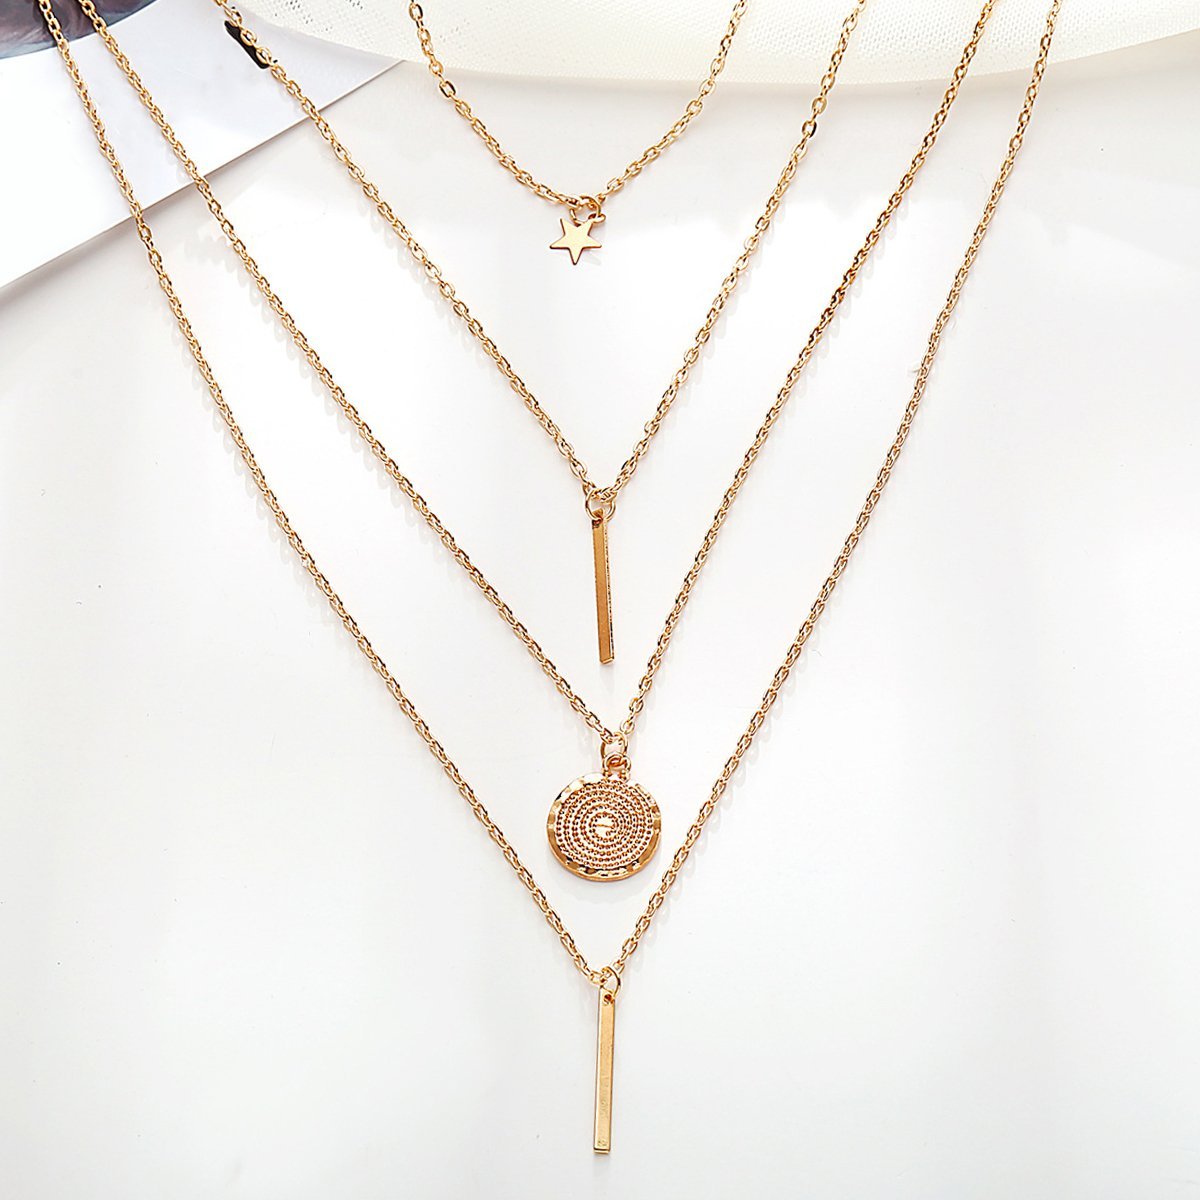 18K Gold Plated Rectangle Drop Necklace - 3 Piece Set, 18" + 2" Extender, Link Chain, Lobster Clasp, Made in Italy Bijou Her